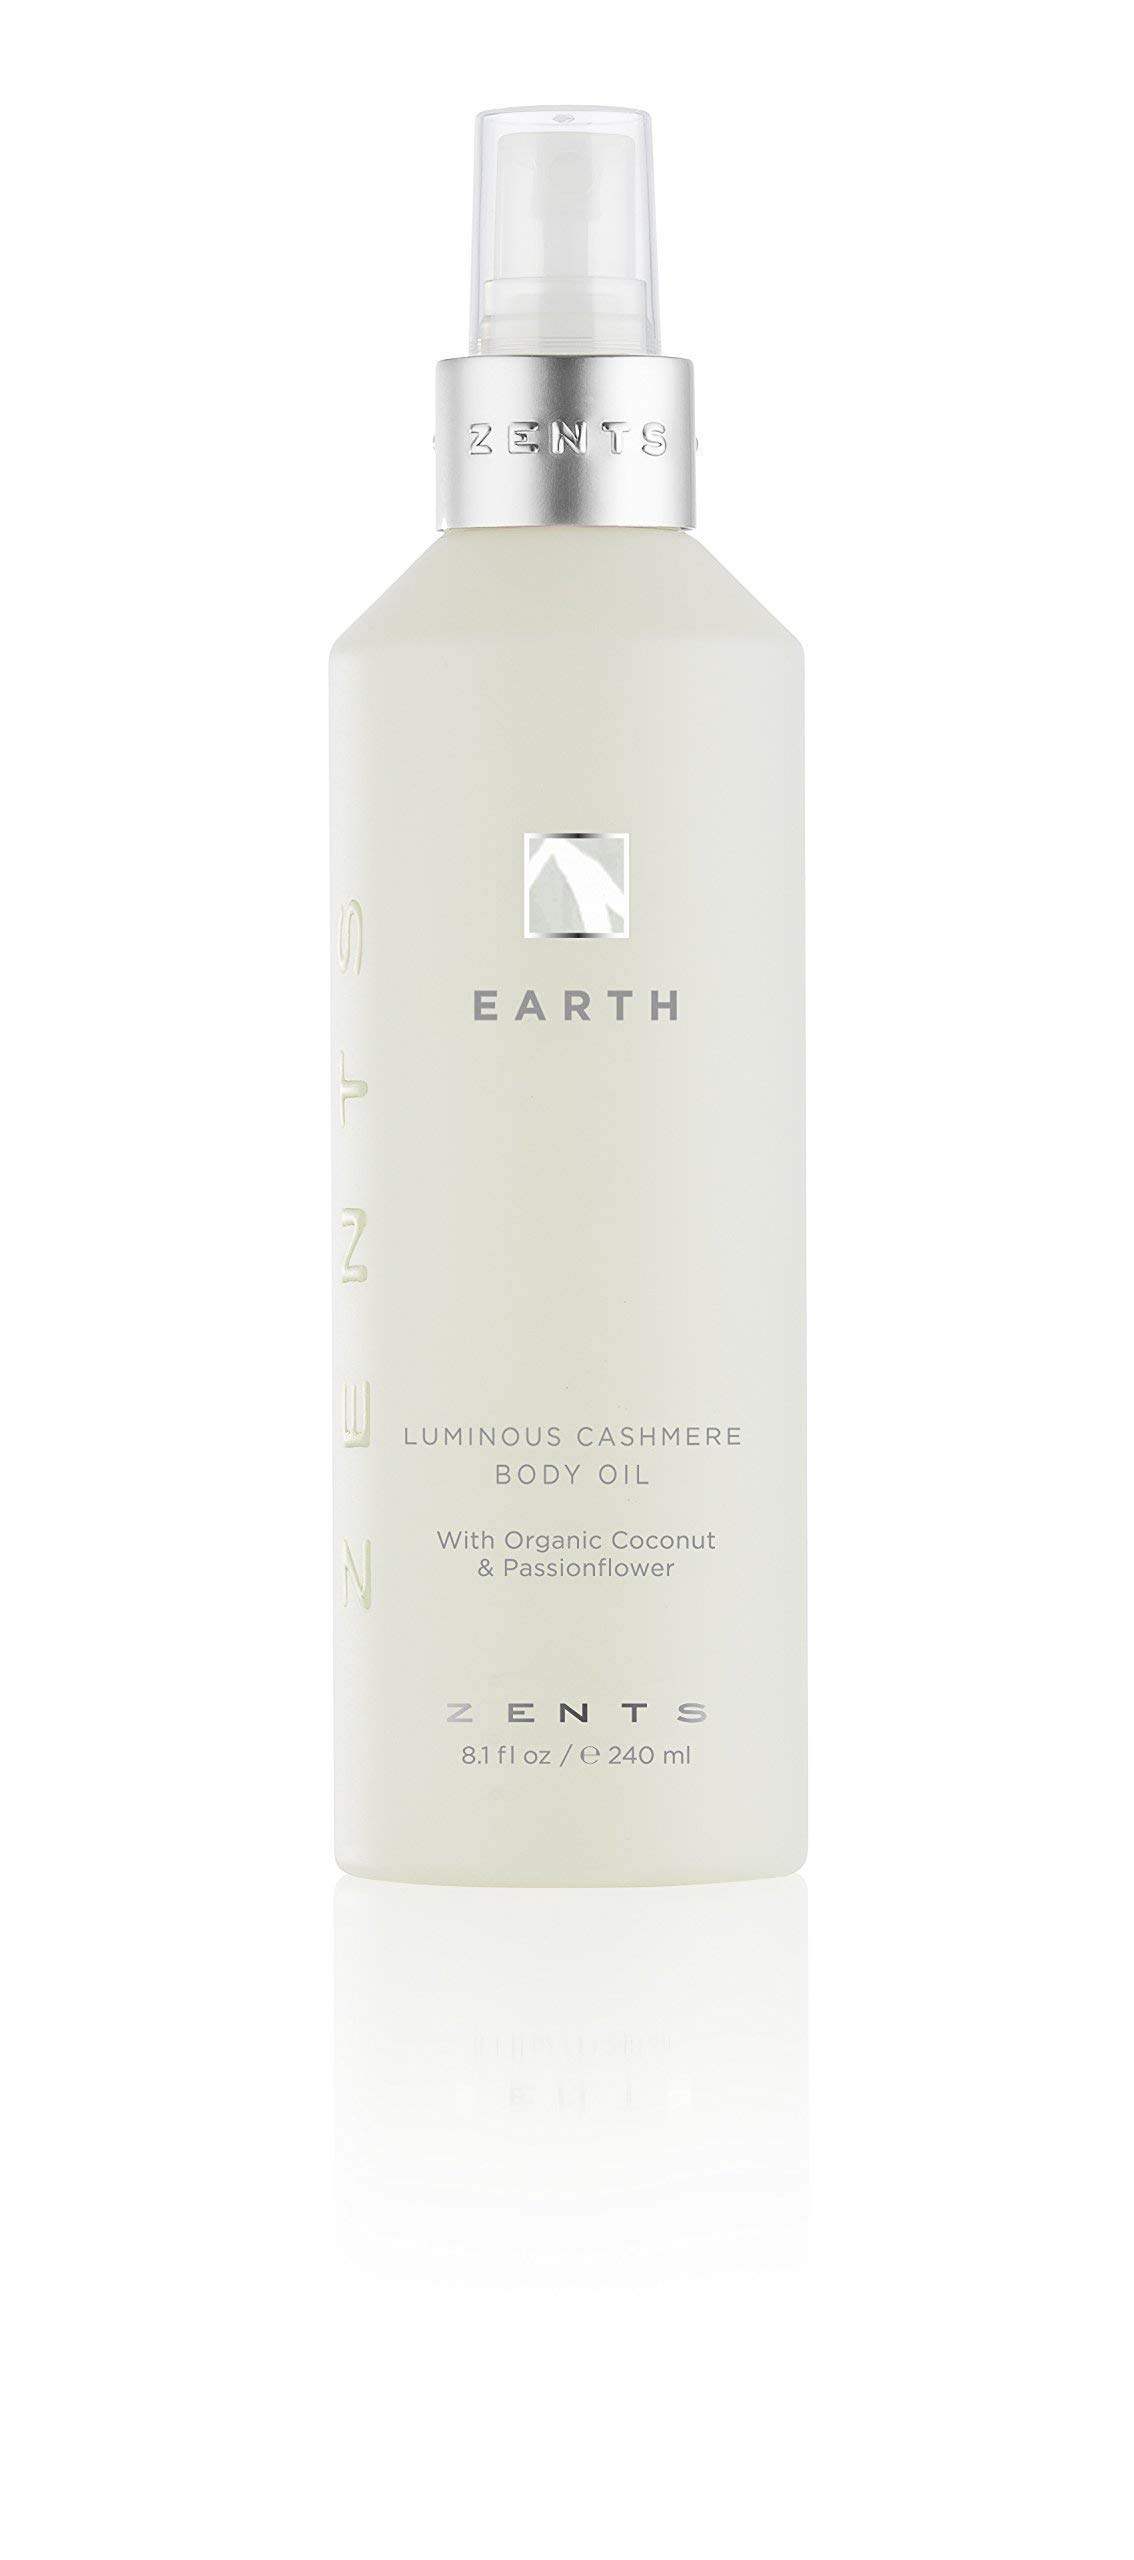 Zents Body Wash, Lotion, Cashmere Oil Set (Earth), Age Defying Combination to Cleanse, Moisturize and Nourish Dry Skin, A Powerful Skin Healing Trio